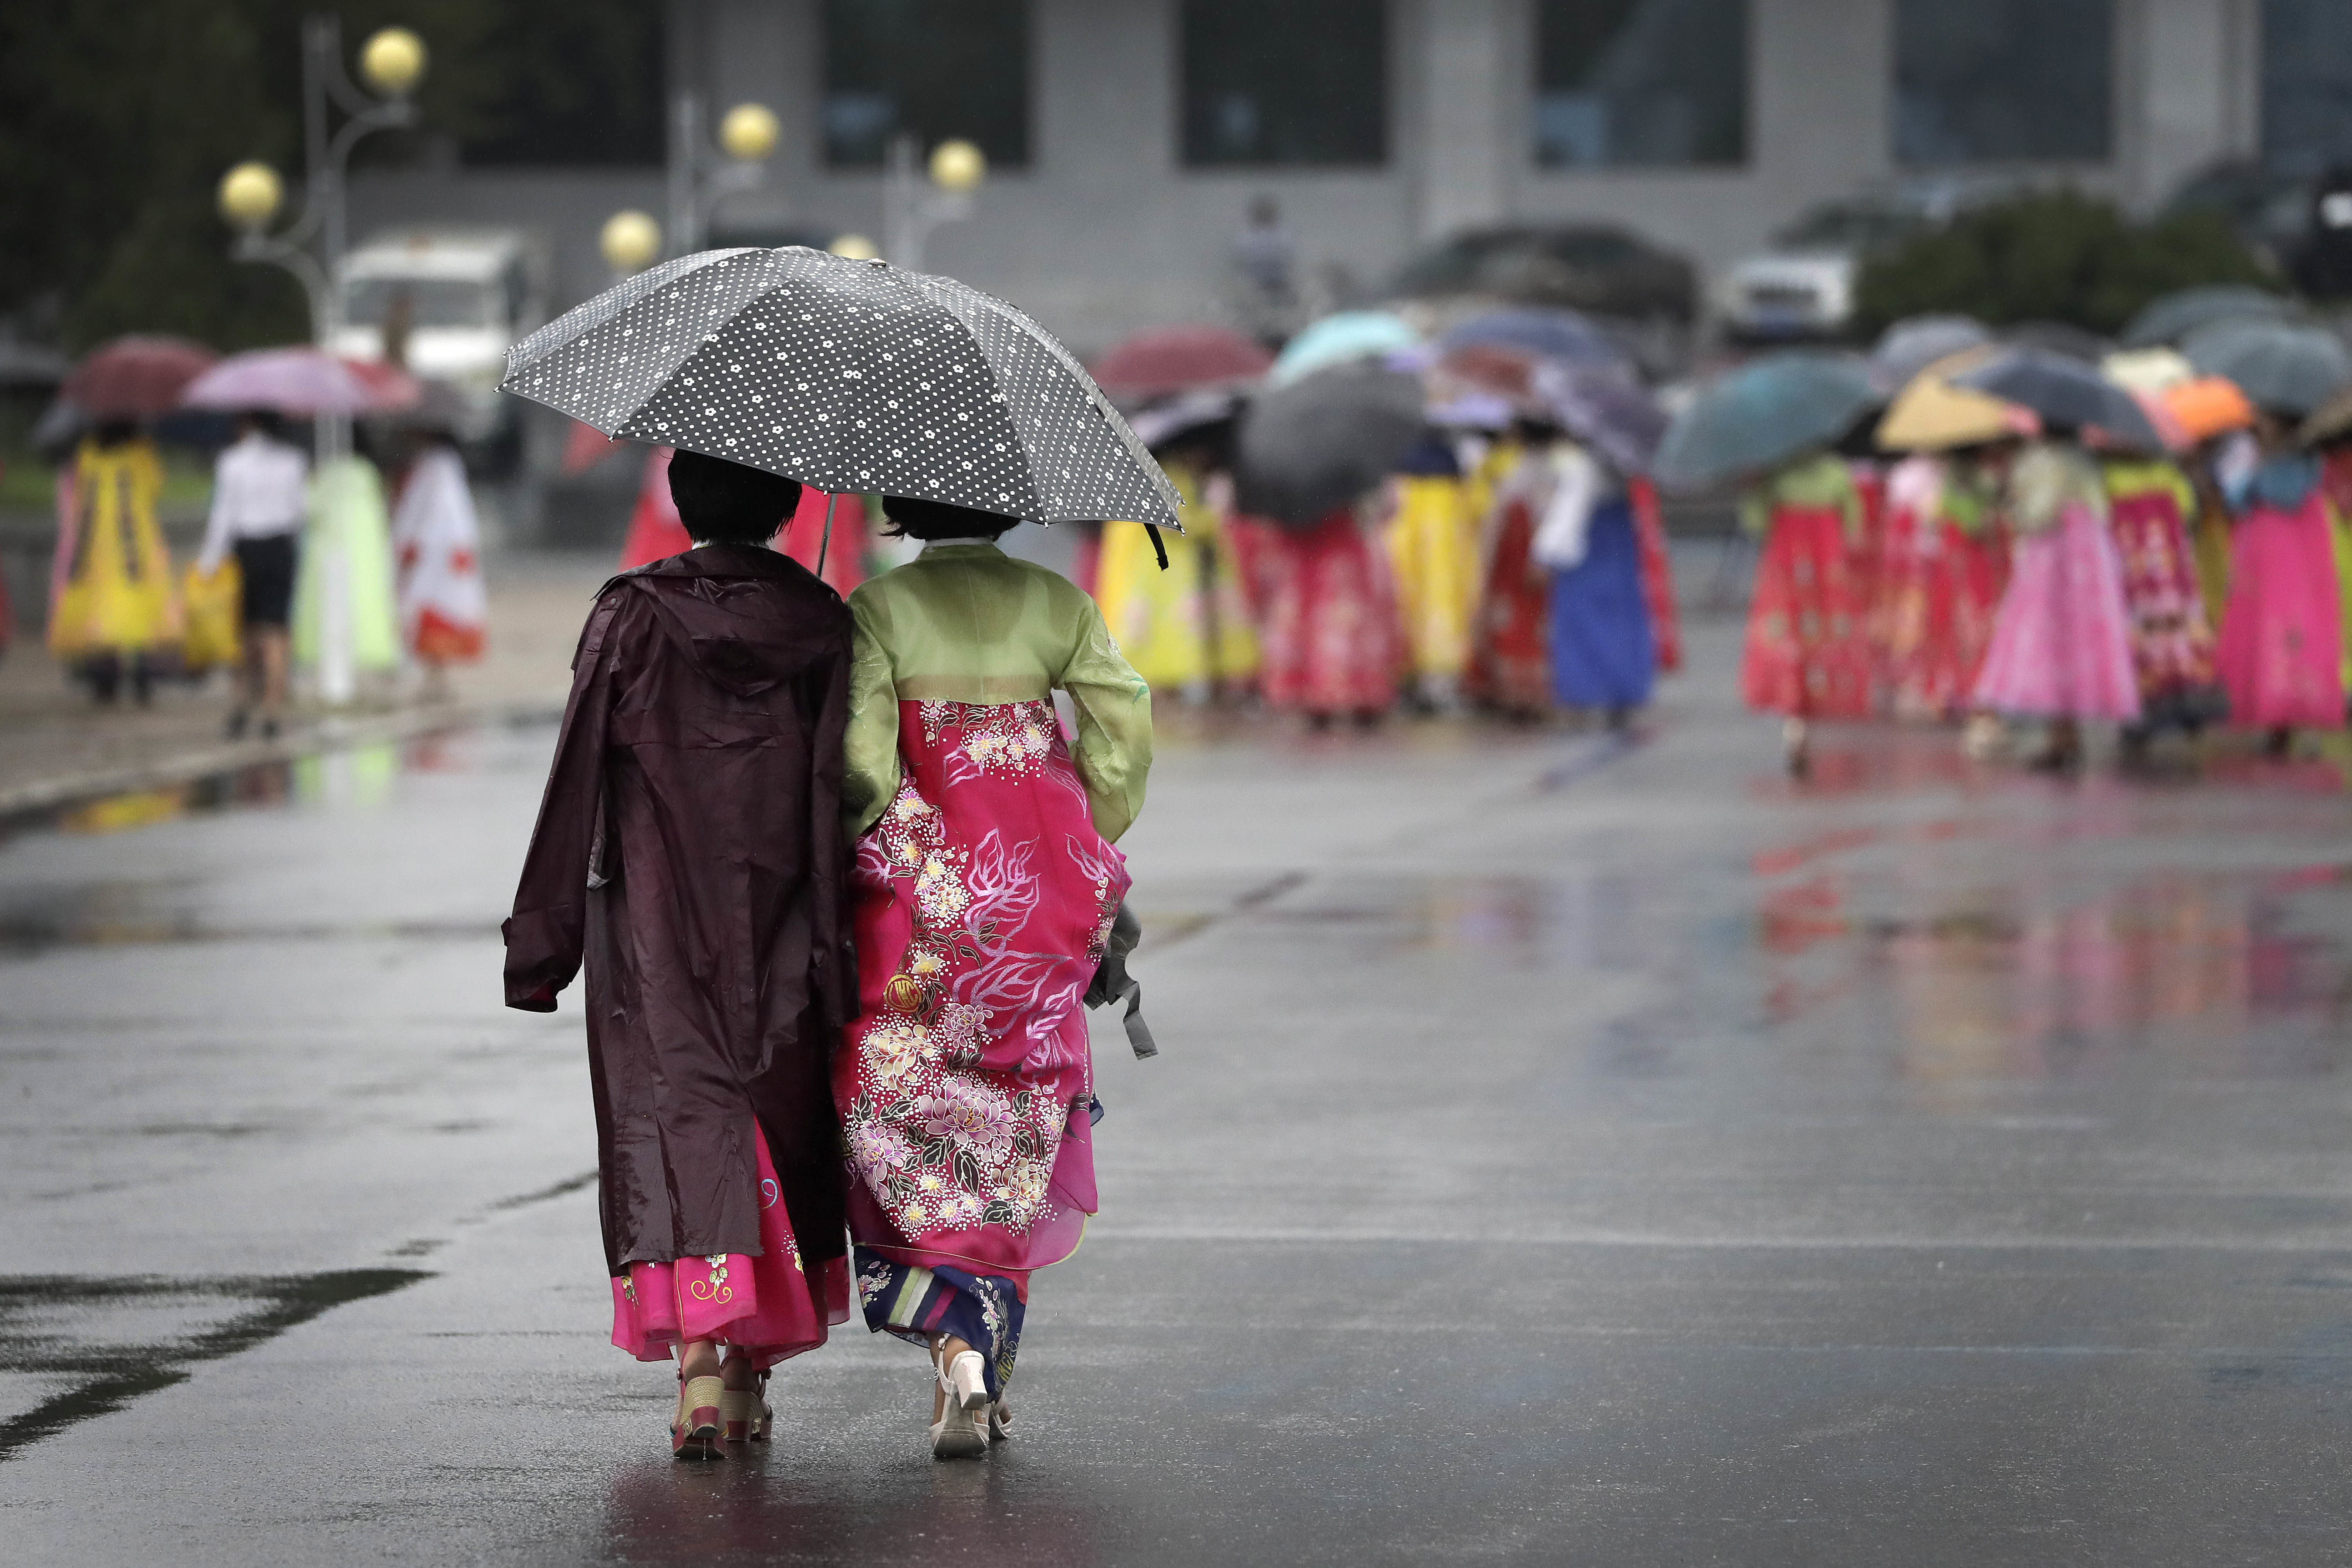 Two university students walk in the rain to a mass dance event on Thursday, July 27, 2017, in Pyongyang, North Korea as part of celebrations for the 64th anniversary of the armistice that ended the Korean War. (AP Photo/Wong Maye-E)